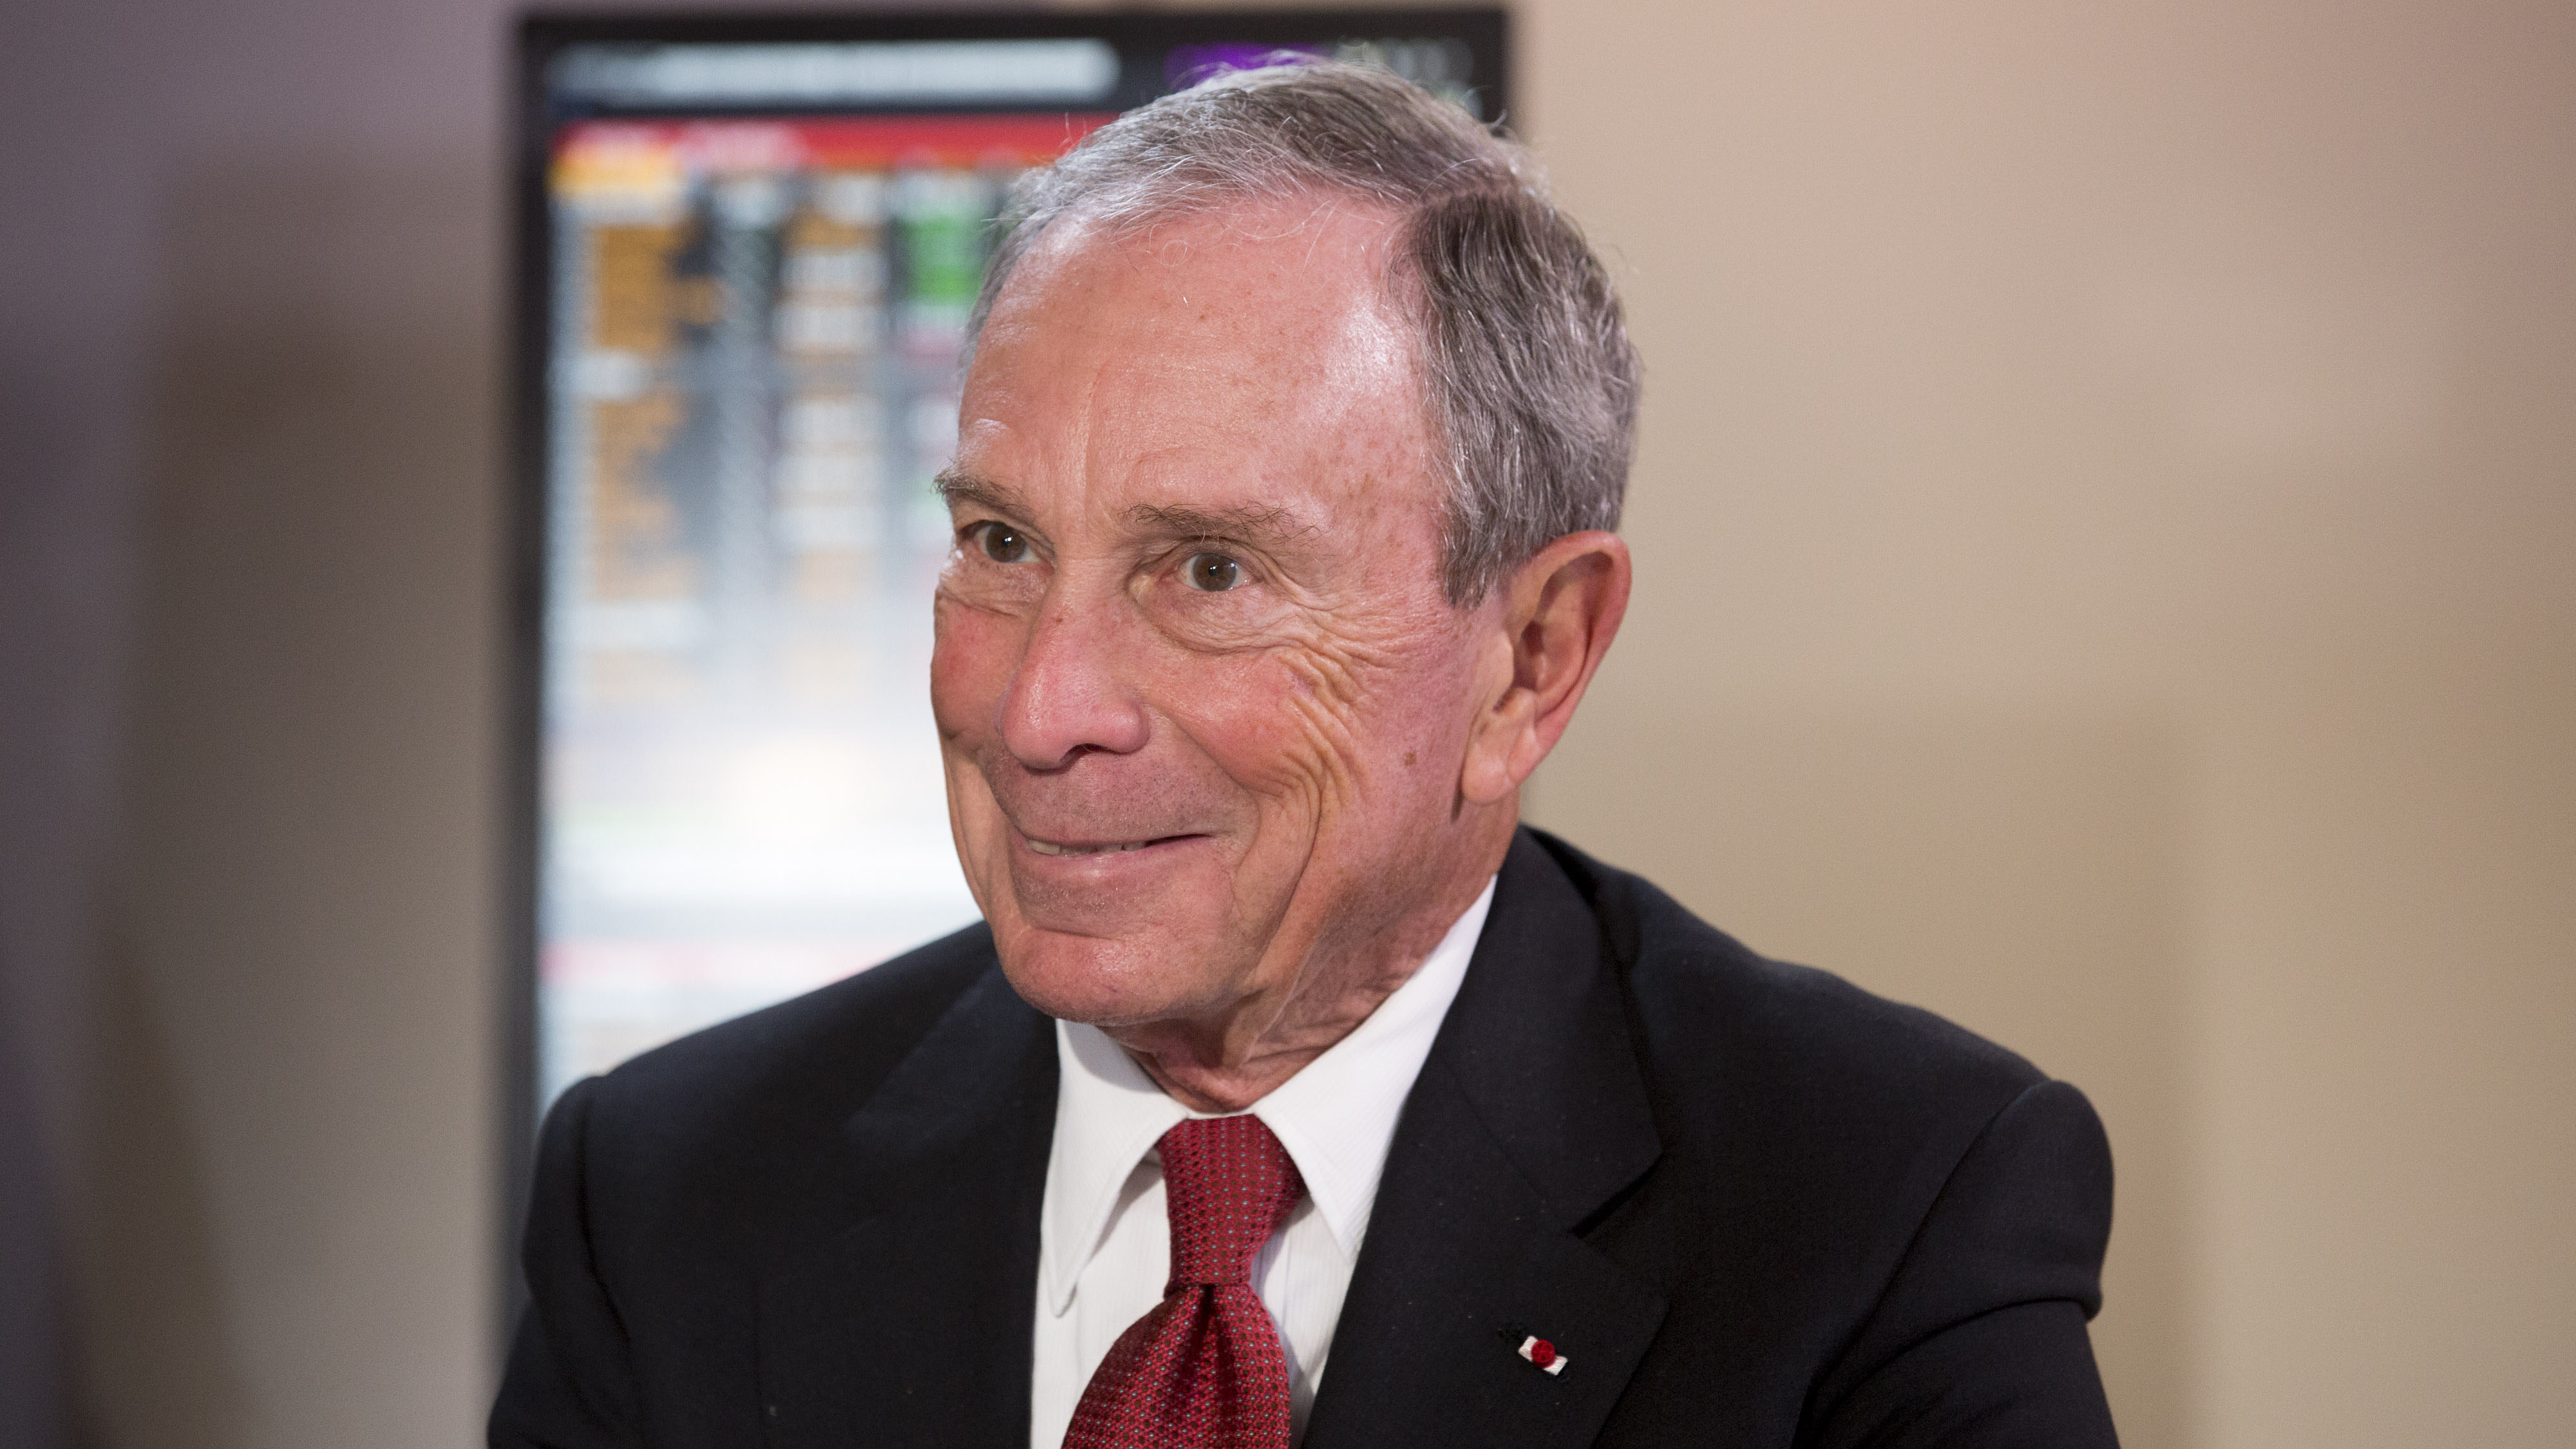 Michael Bloomberg, United Nations special envoy for cities and climate change and founder of Bloomberg LP, reacts during a news conference at the United Nations COP21 climate summit at Le Bourget in Paris, France, on Friday, Dec. 4, 2015.
